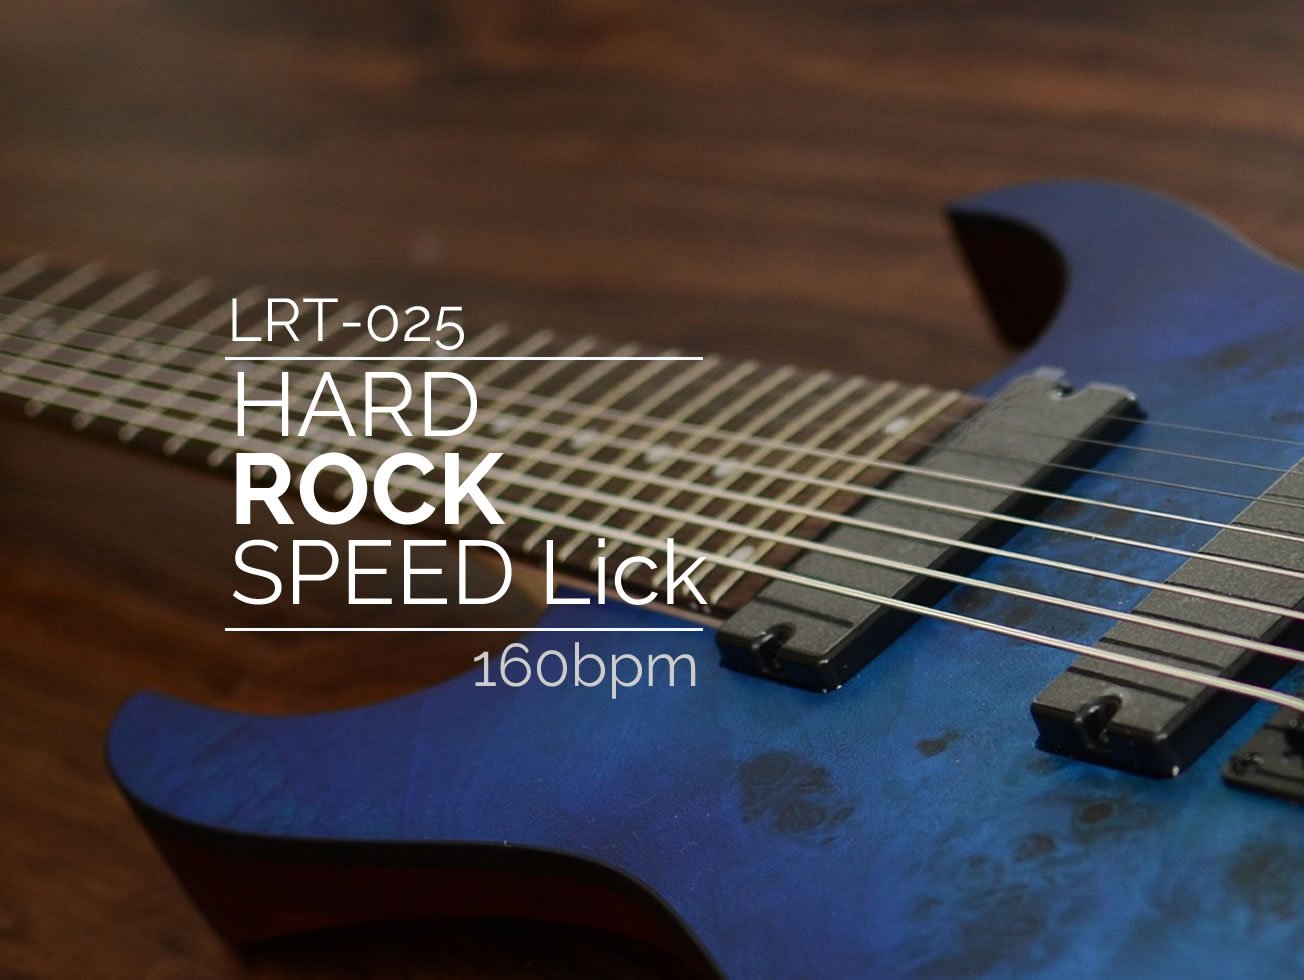 Guitar speed lick lessons